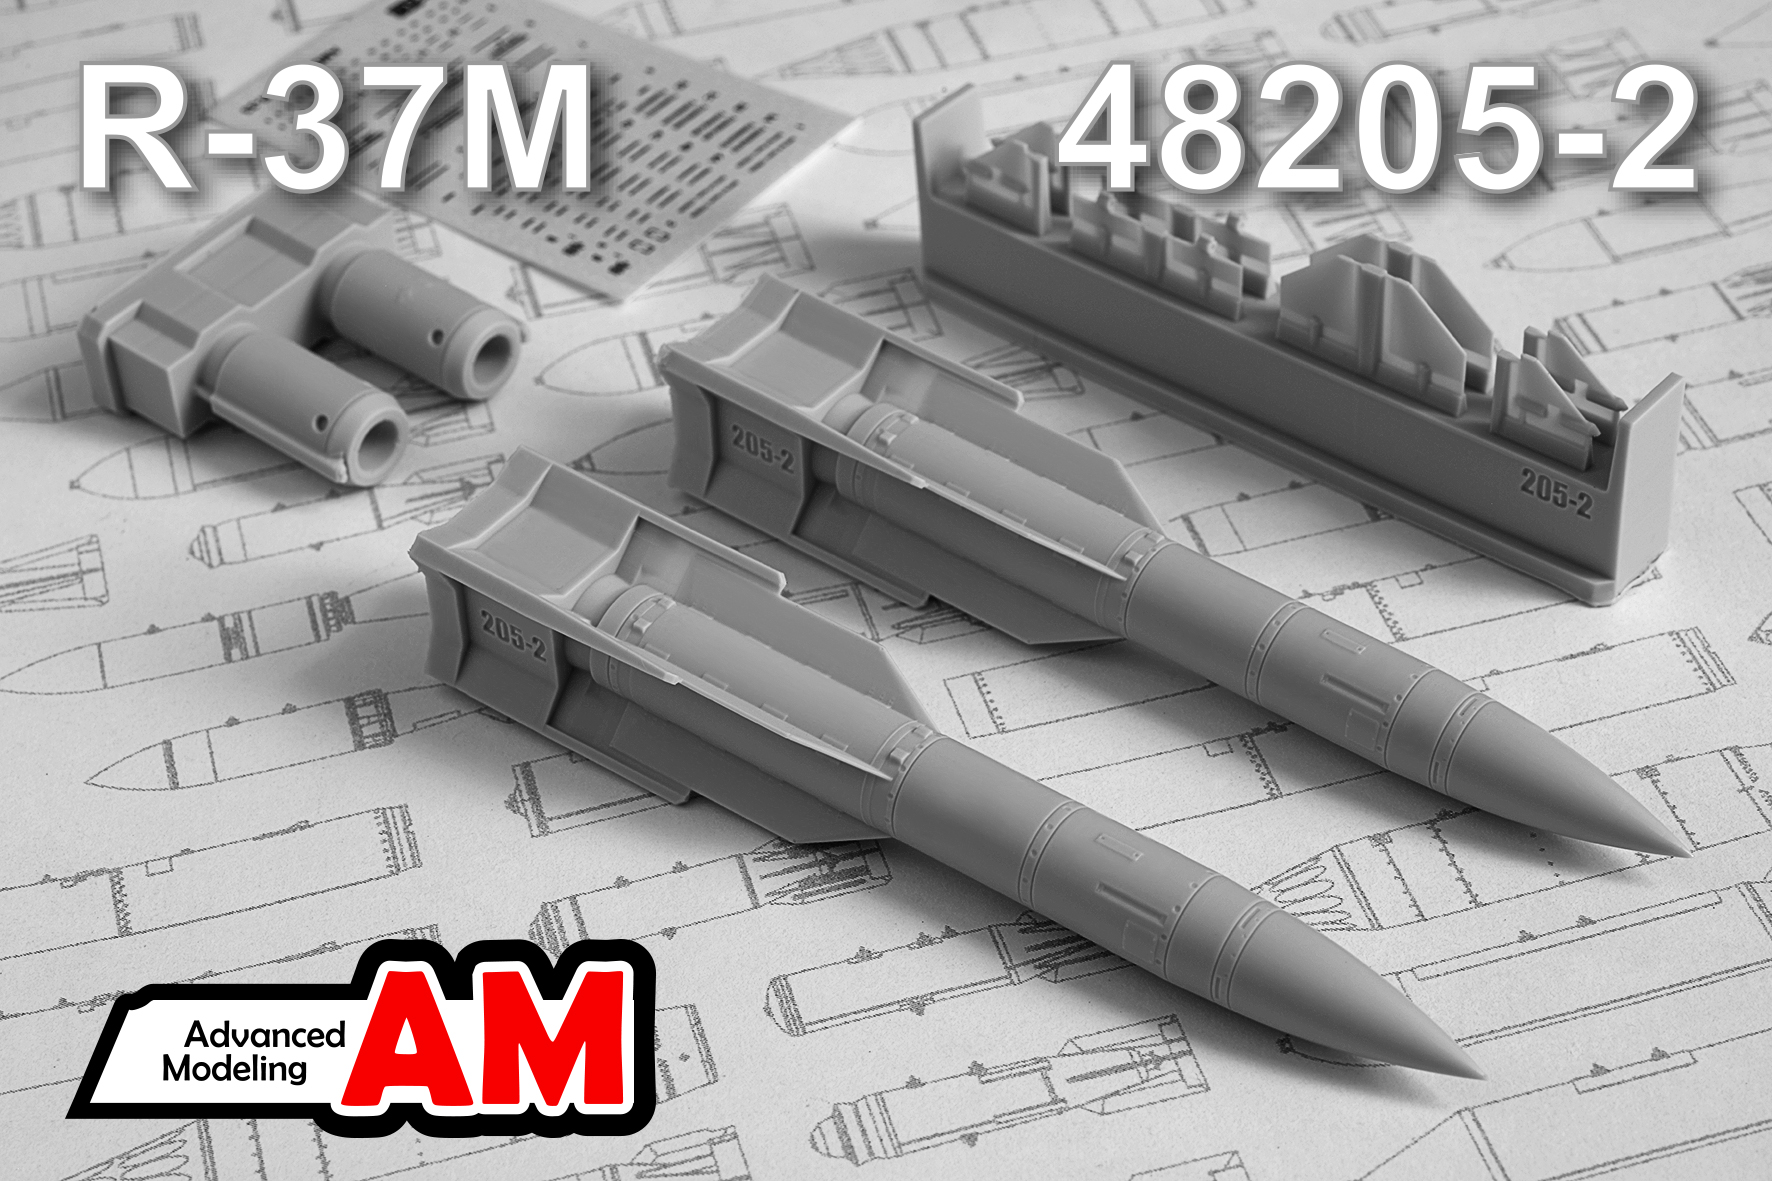 Additions (3D resin printing) 1/48 R-37M Air to Air missile (Advanced Modeling) 